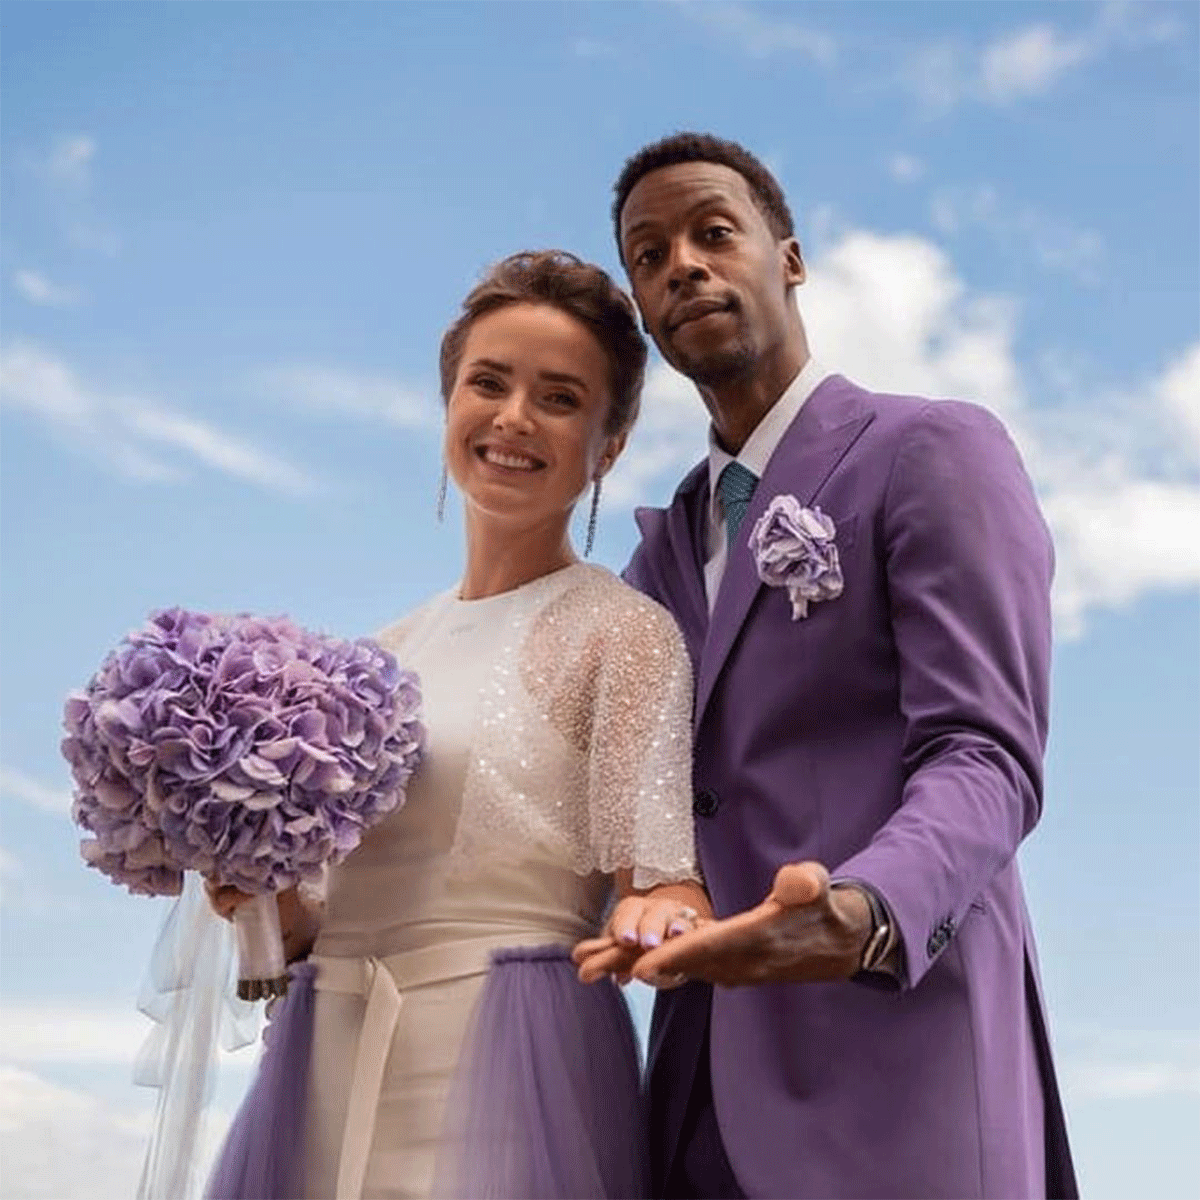 Mr and Mrs Monfils. Elina Svitolina and Gael Monfils at their wedding on Friday